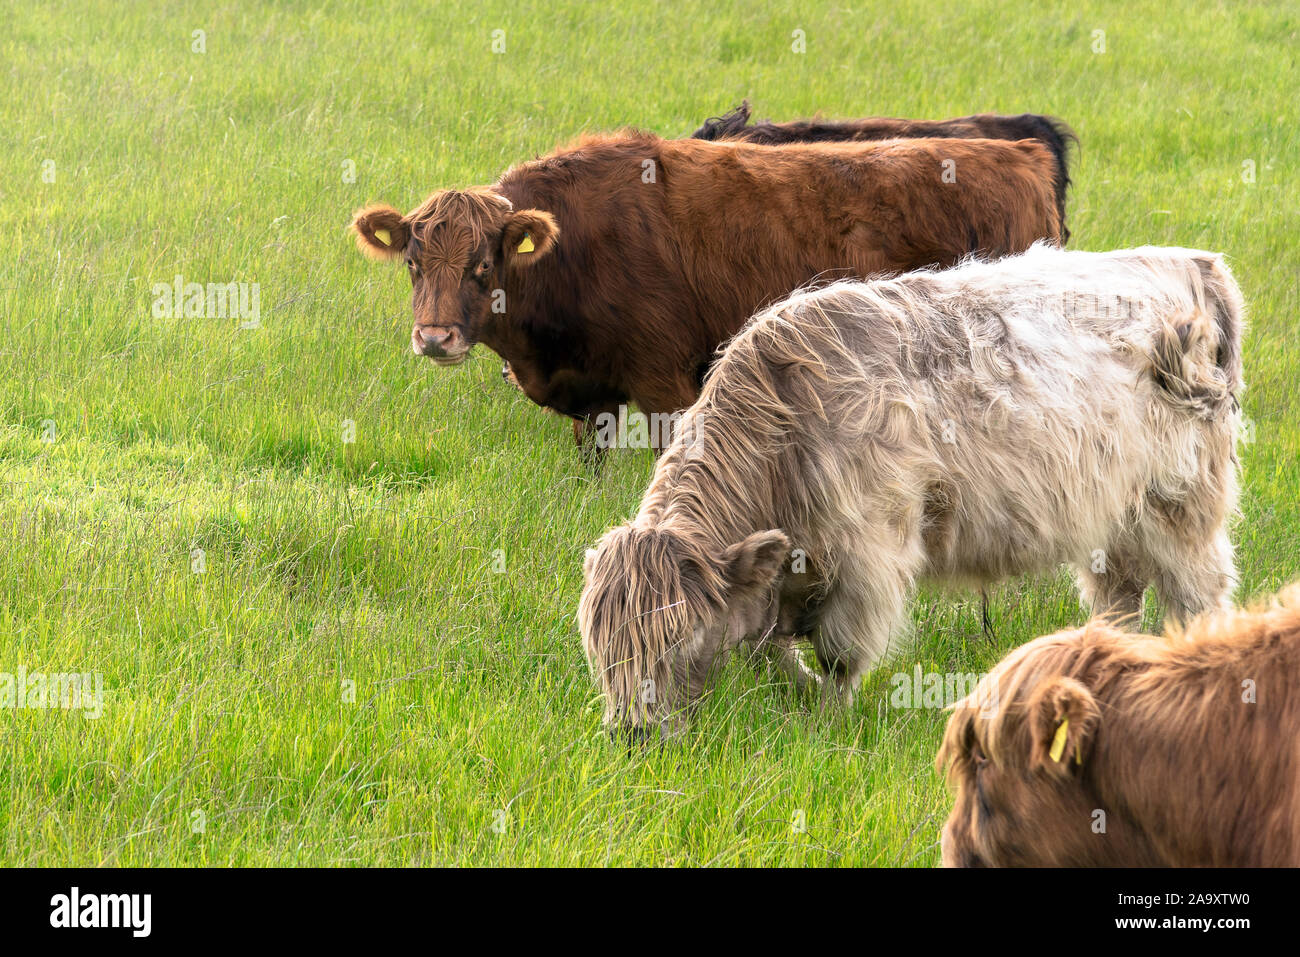 Dairy Cows grazing in a grassy field in spring Stock Photo